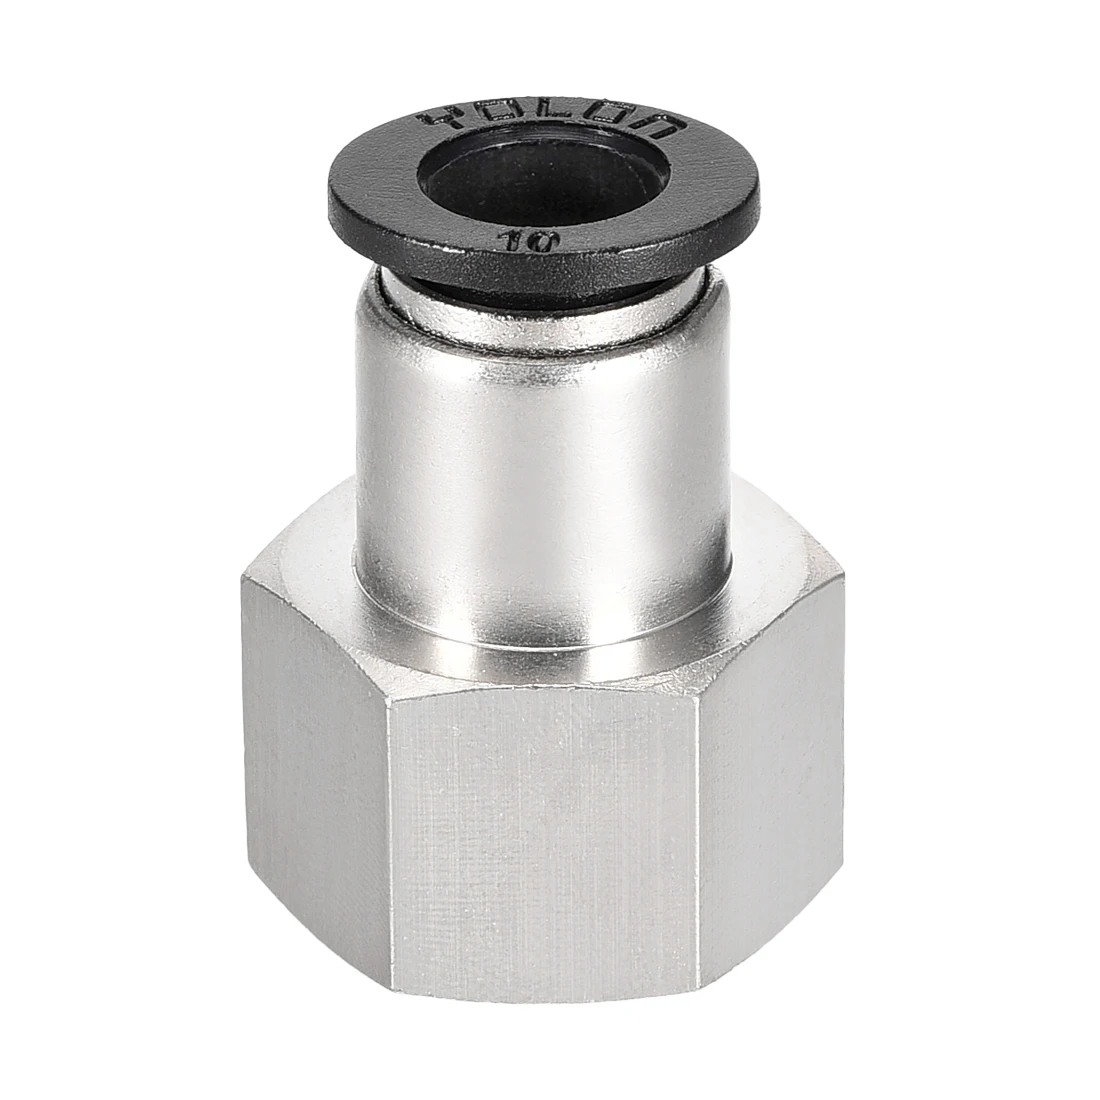 uxcell Push to Connect Tube Fitting Adapter 10mm Tube OD X 1/8 NPT Female Straight Pneumatic Connecter Pipe Fitting 3pcs